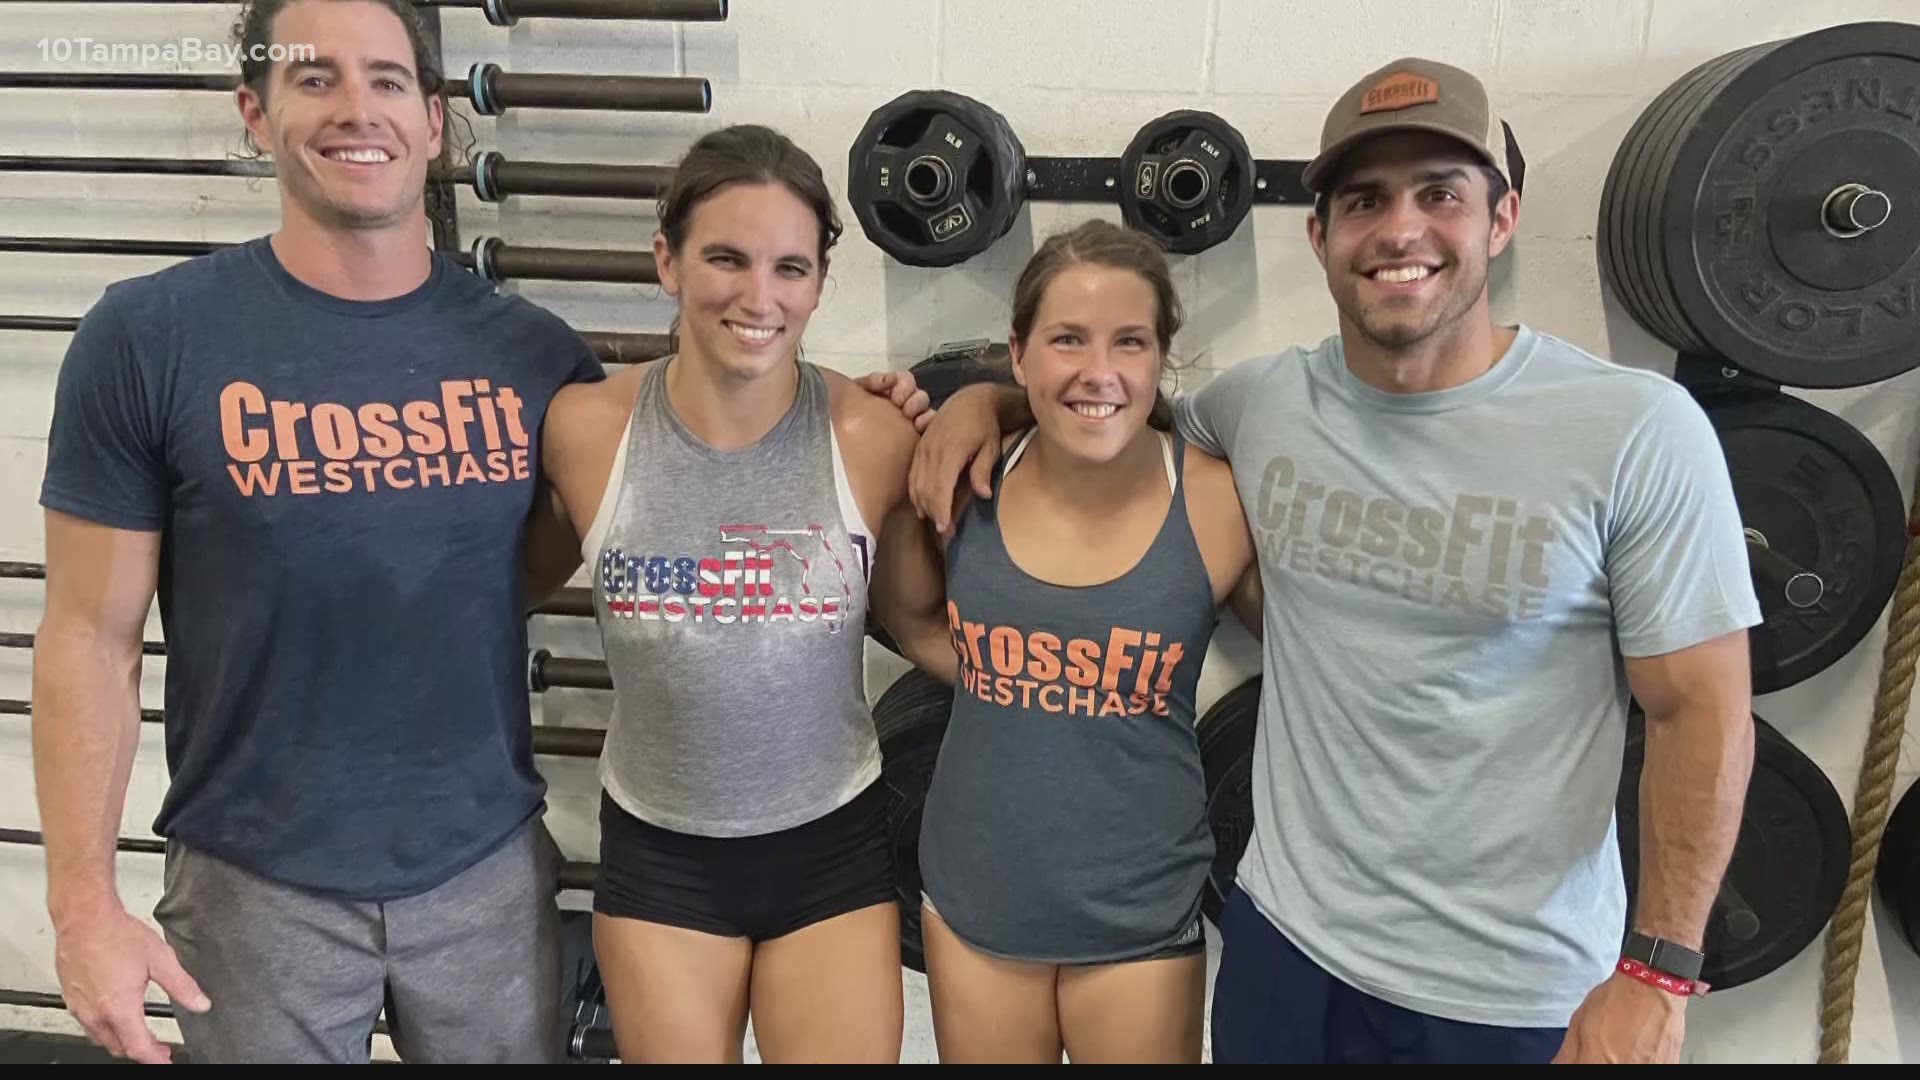 Aaron Hanna, Dillon Bailey, Kimberlee DeKrey, and Hannah Hardy will represent the Tampa Bay area at the annual "Super Bowl" of CrossFit in late July.